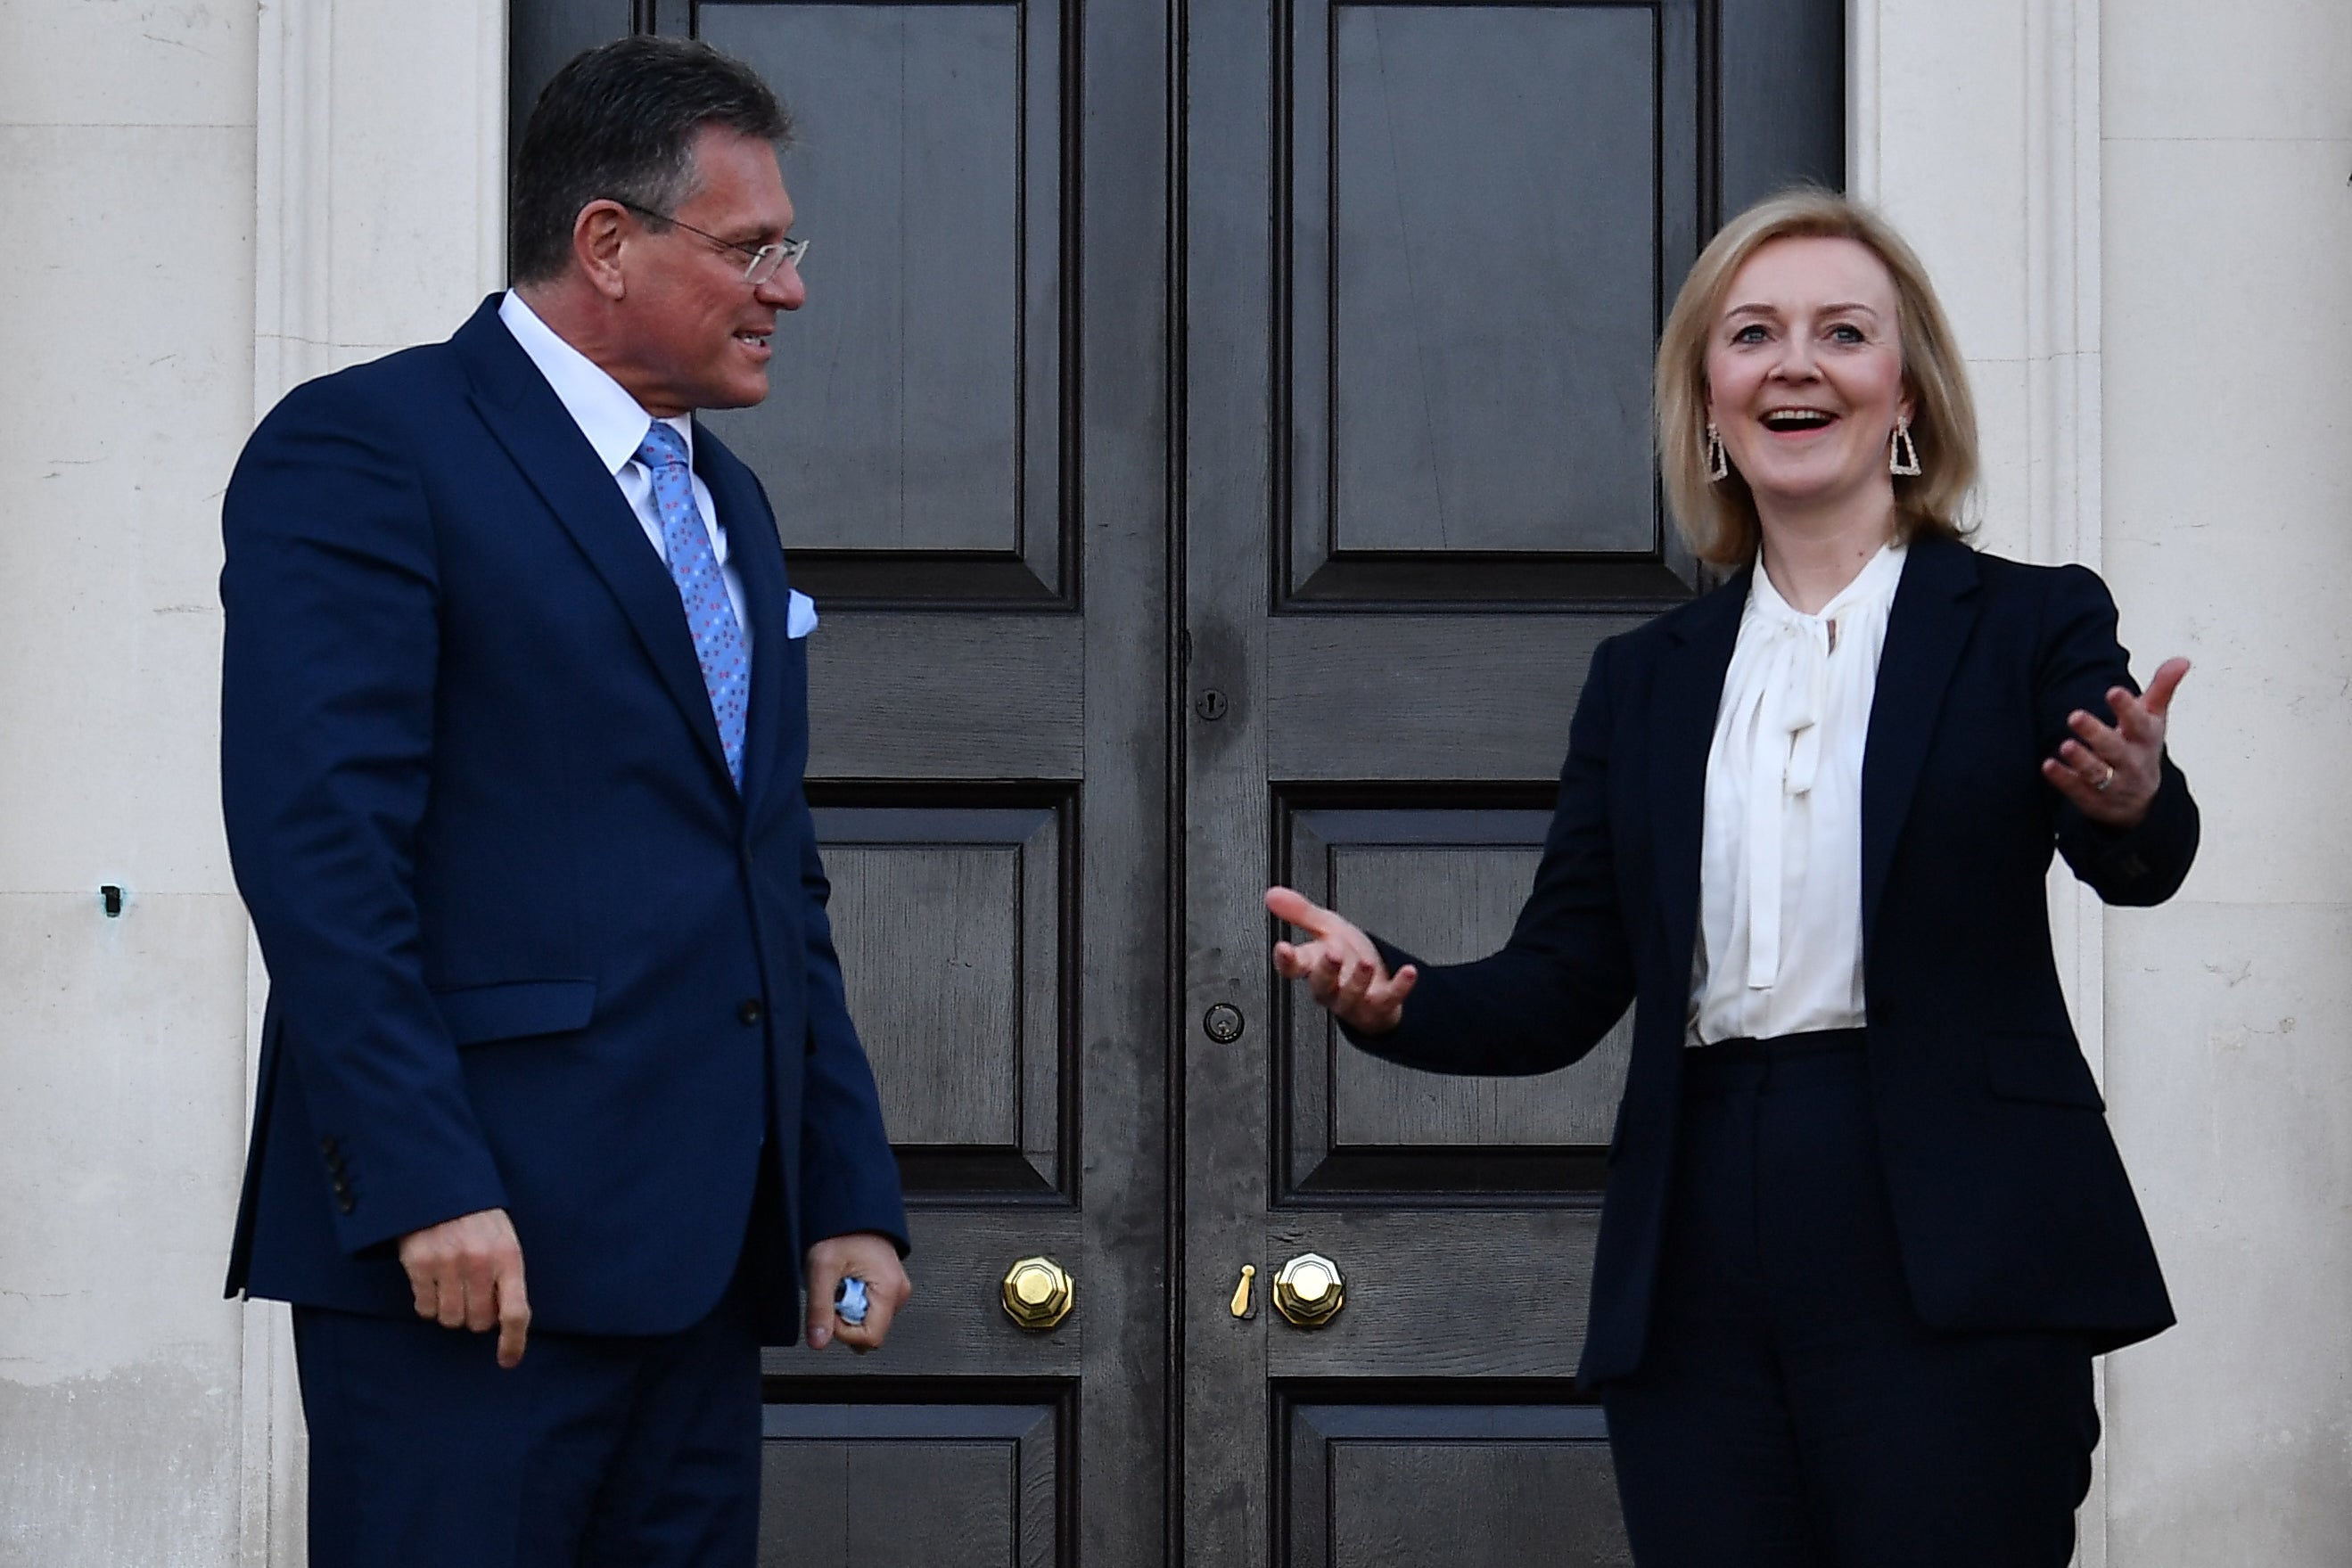 Foreign Secretary Liz Truss, right, has taken over negotiating on the UK’s behalf with the European Commission’s Maros Sefcovic, left (Ben Stansall/PA)